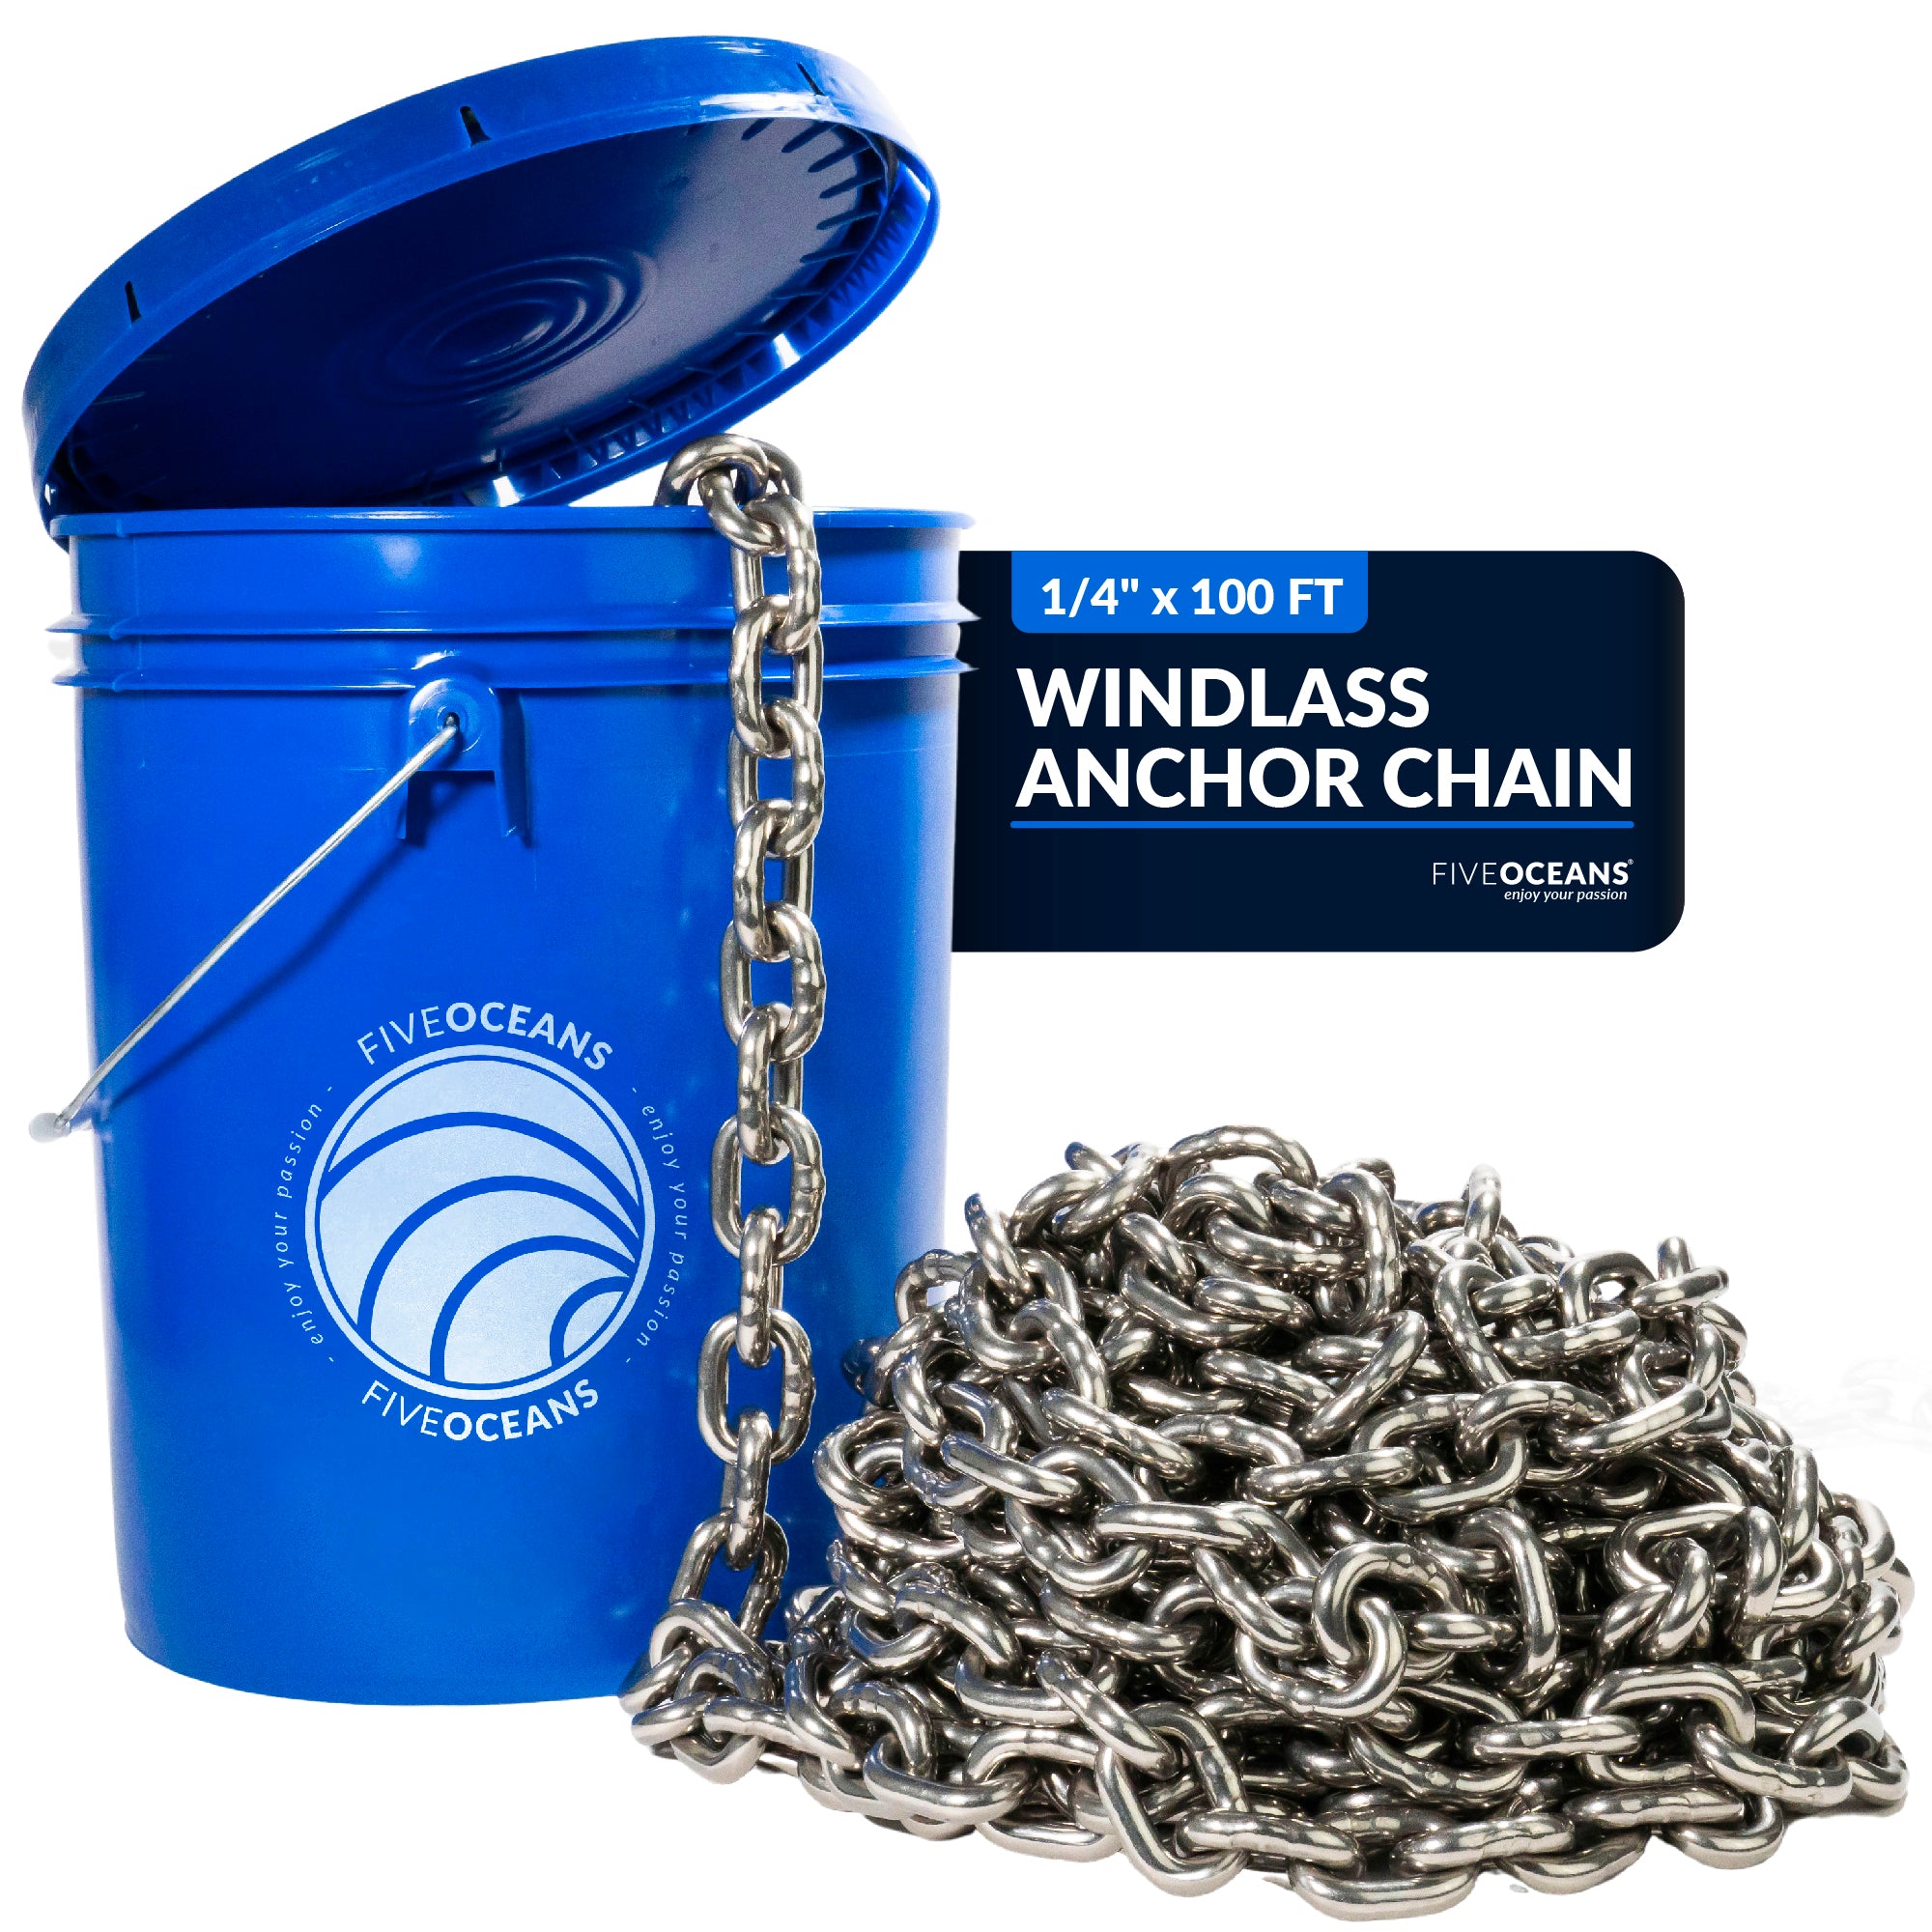 1/4" x 100' Boat Windlass Anchor Chain HT G4 Stainles Steel - FO4492-M100